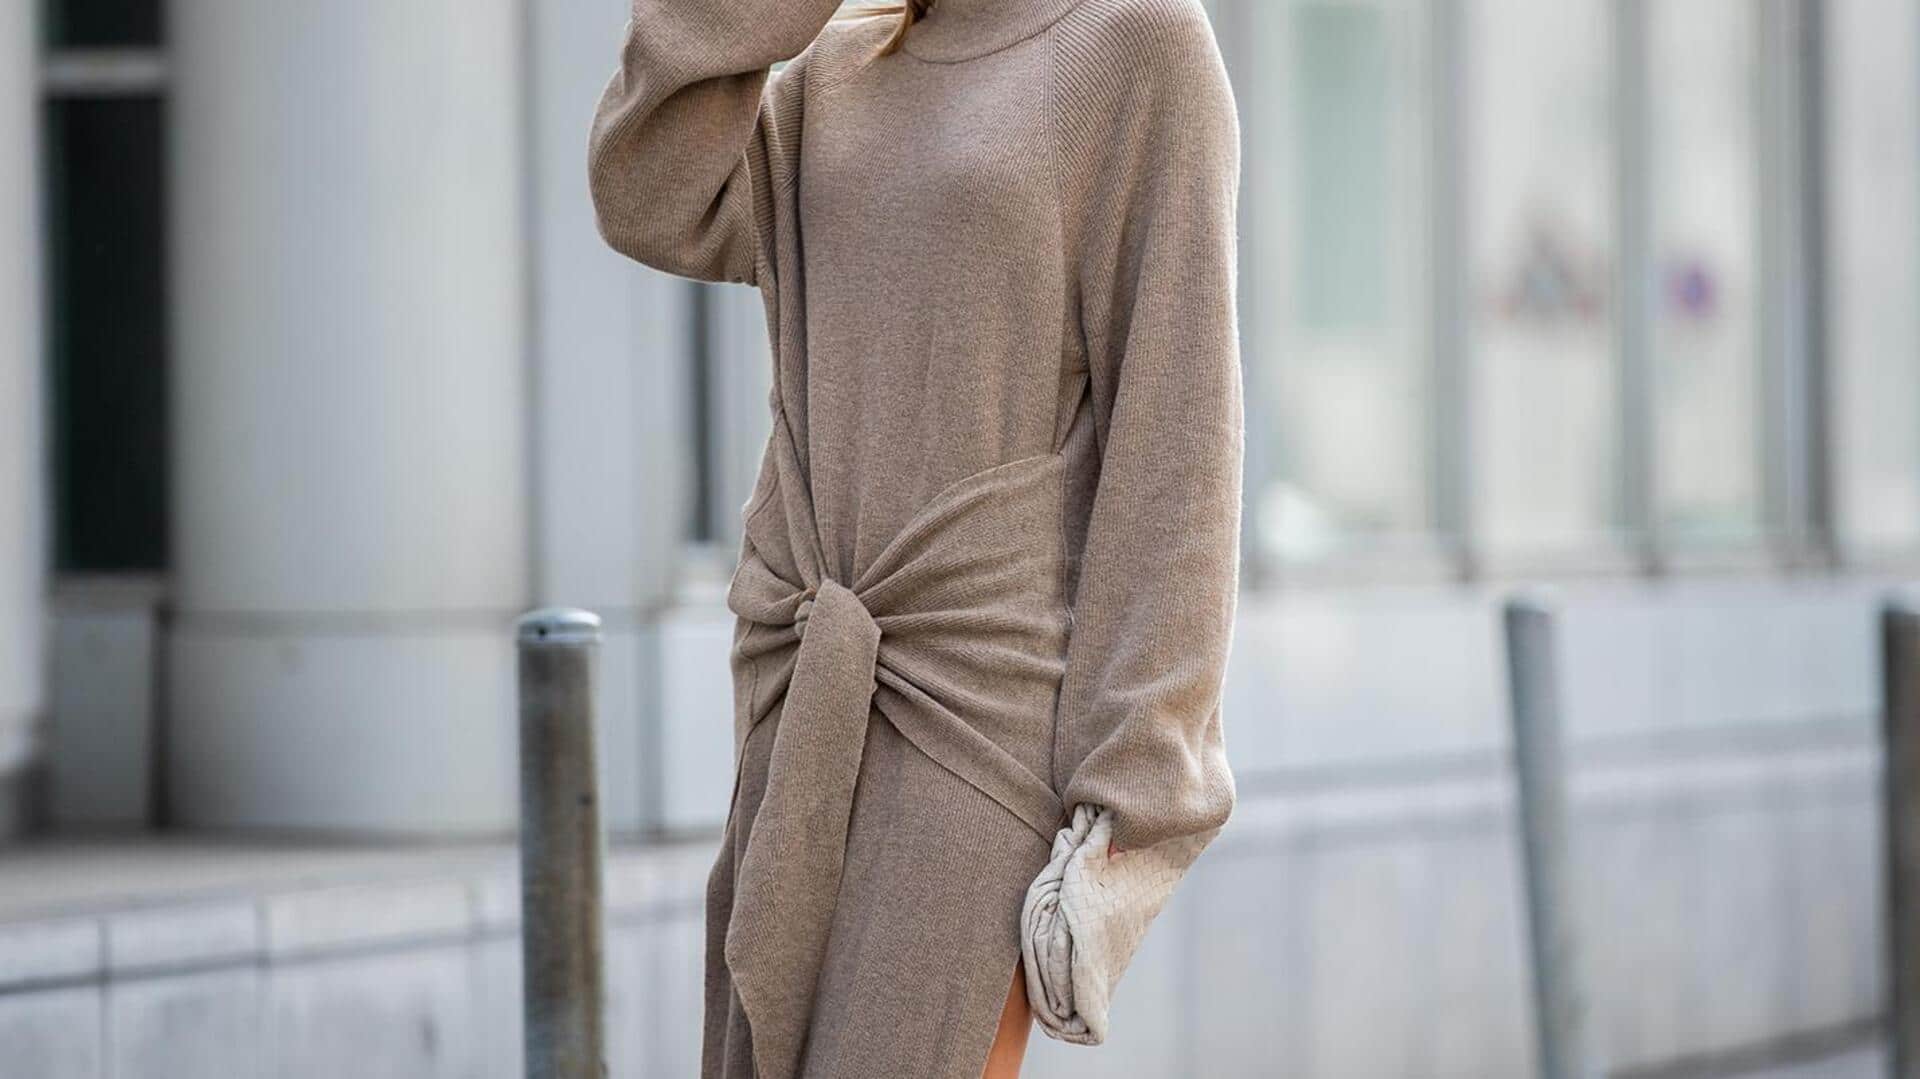 Effortless elegance: Tips to elevate sweater dress style